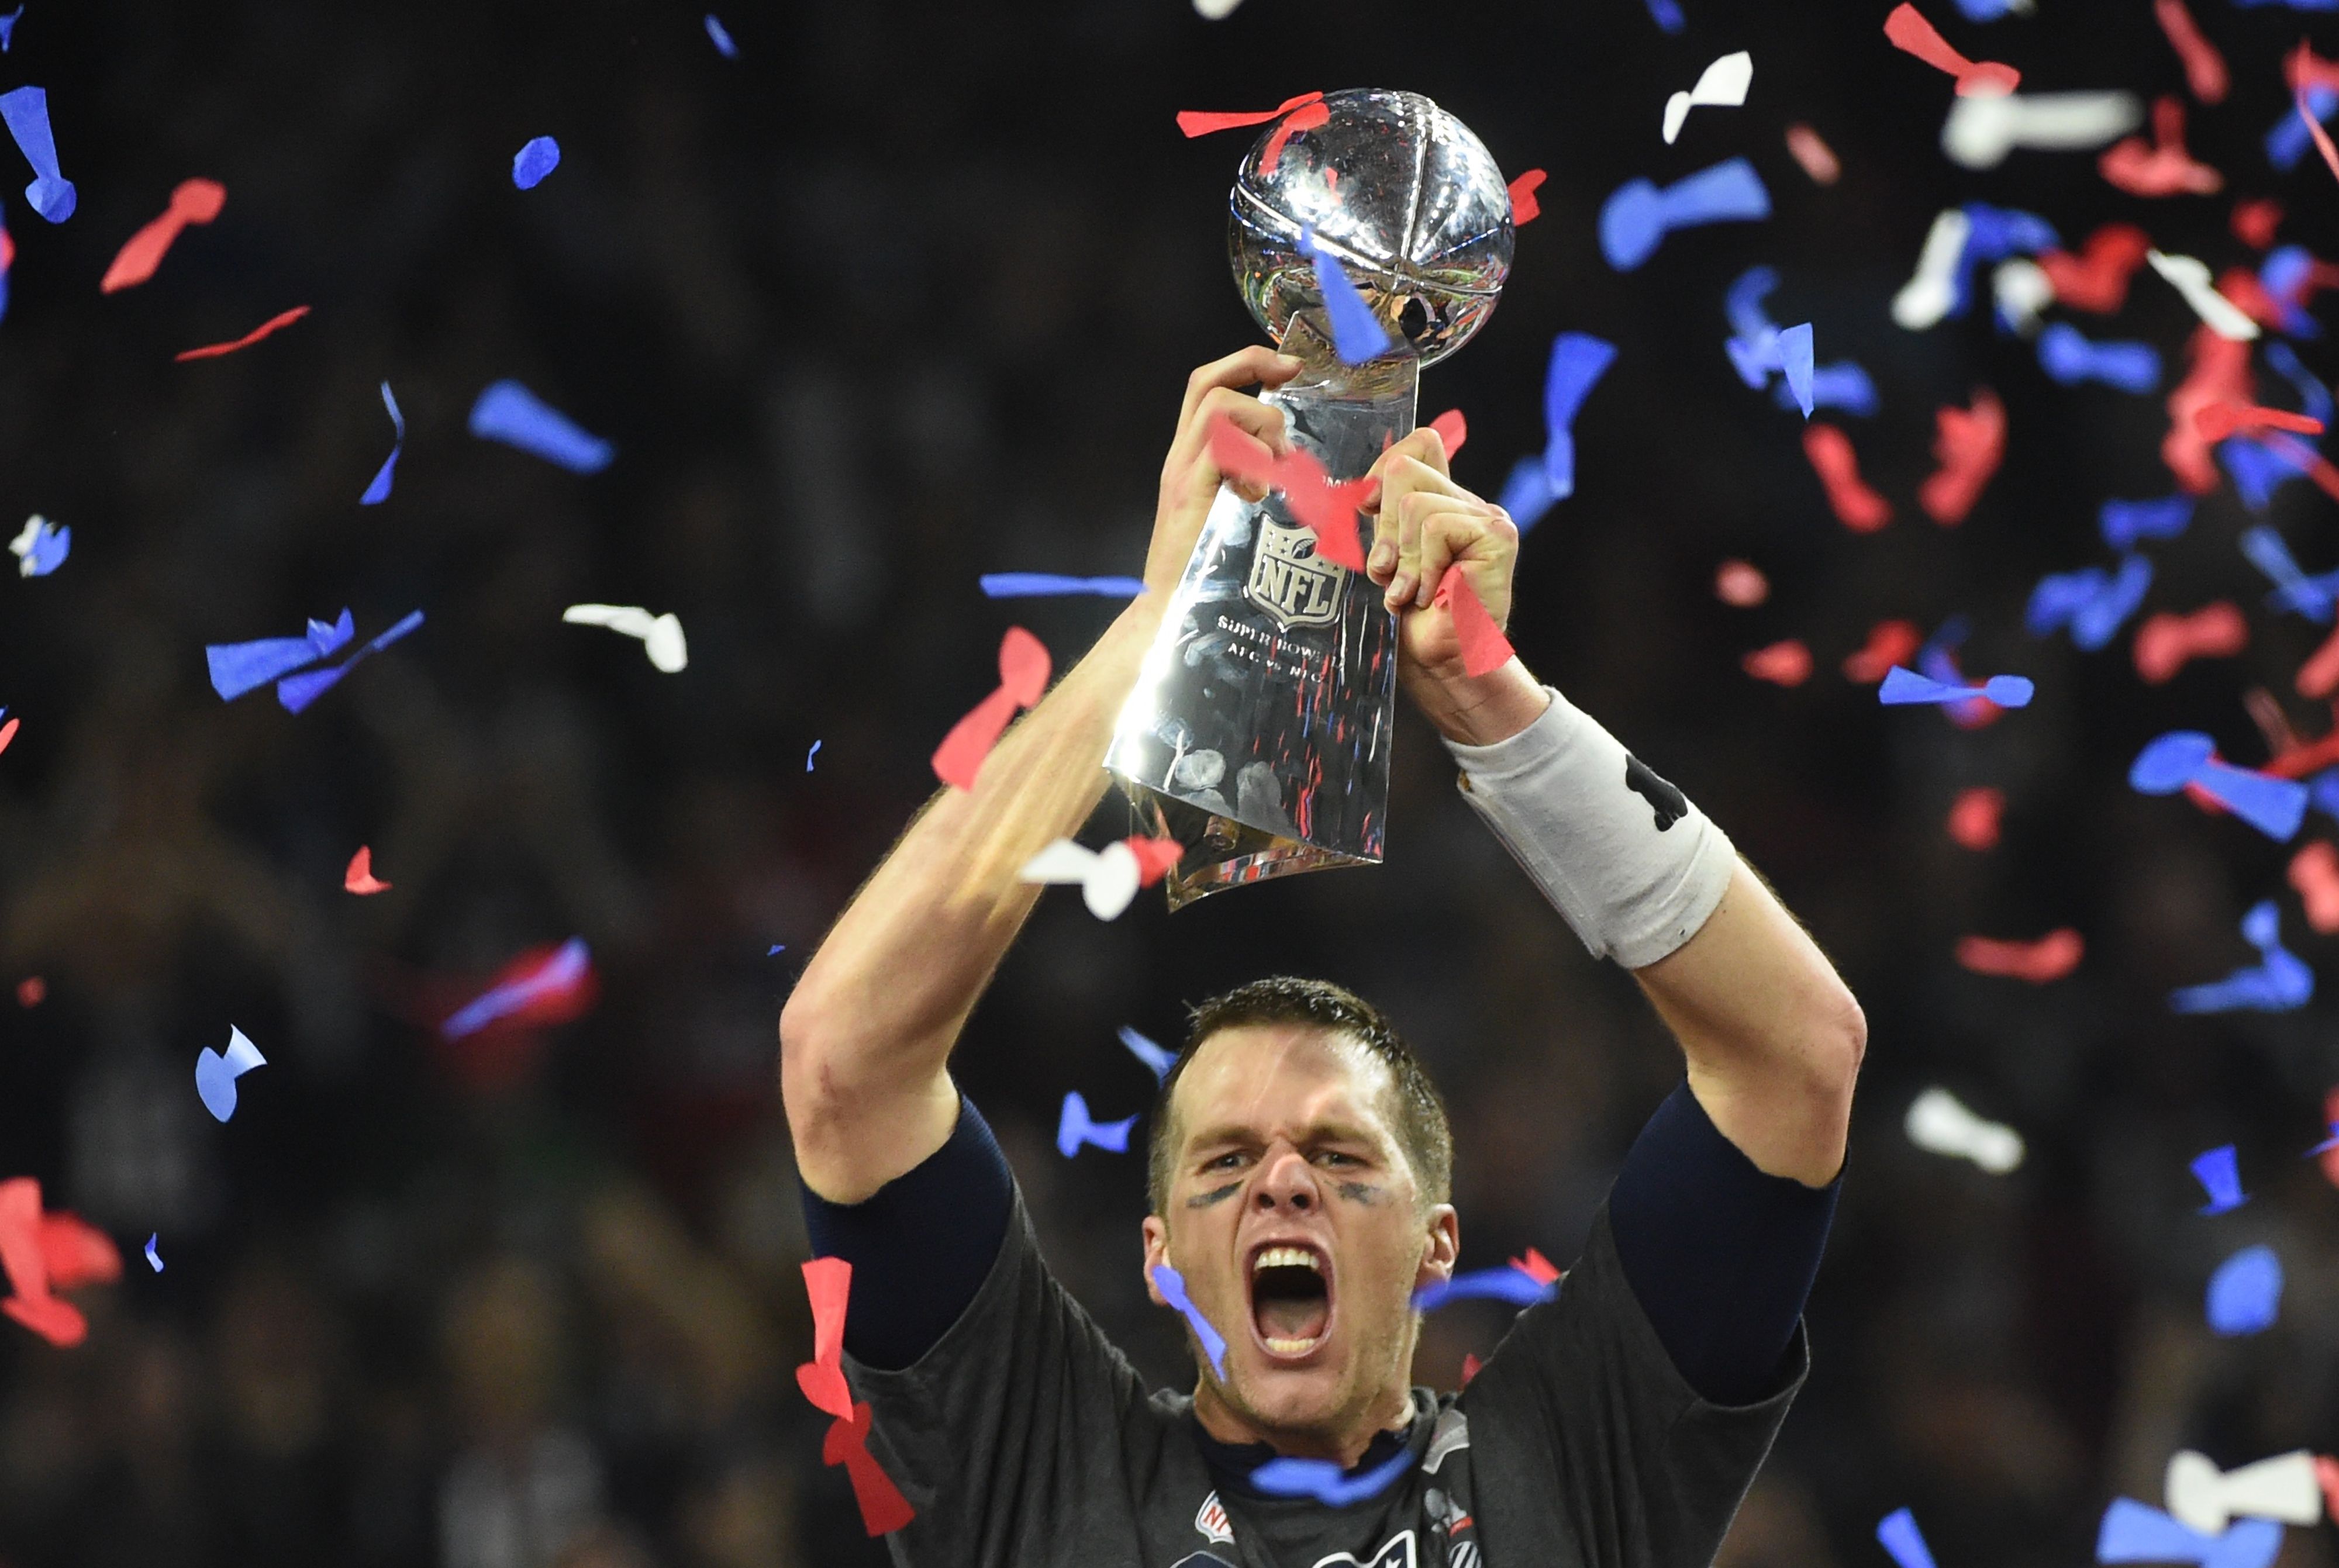 Tom Brady #12 of the New England Patriots holds the Vince Lombardi Trophy after winning Super Bowl 51.